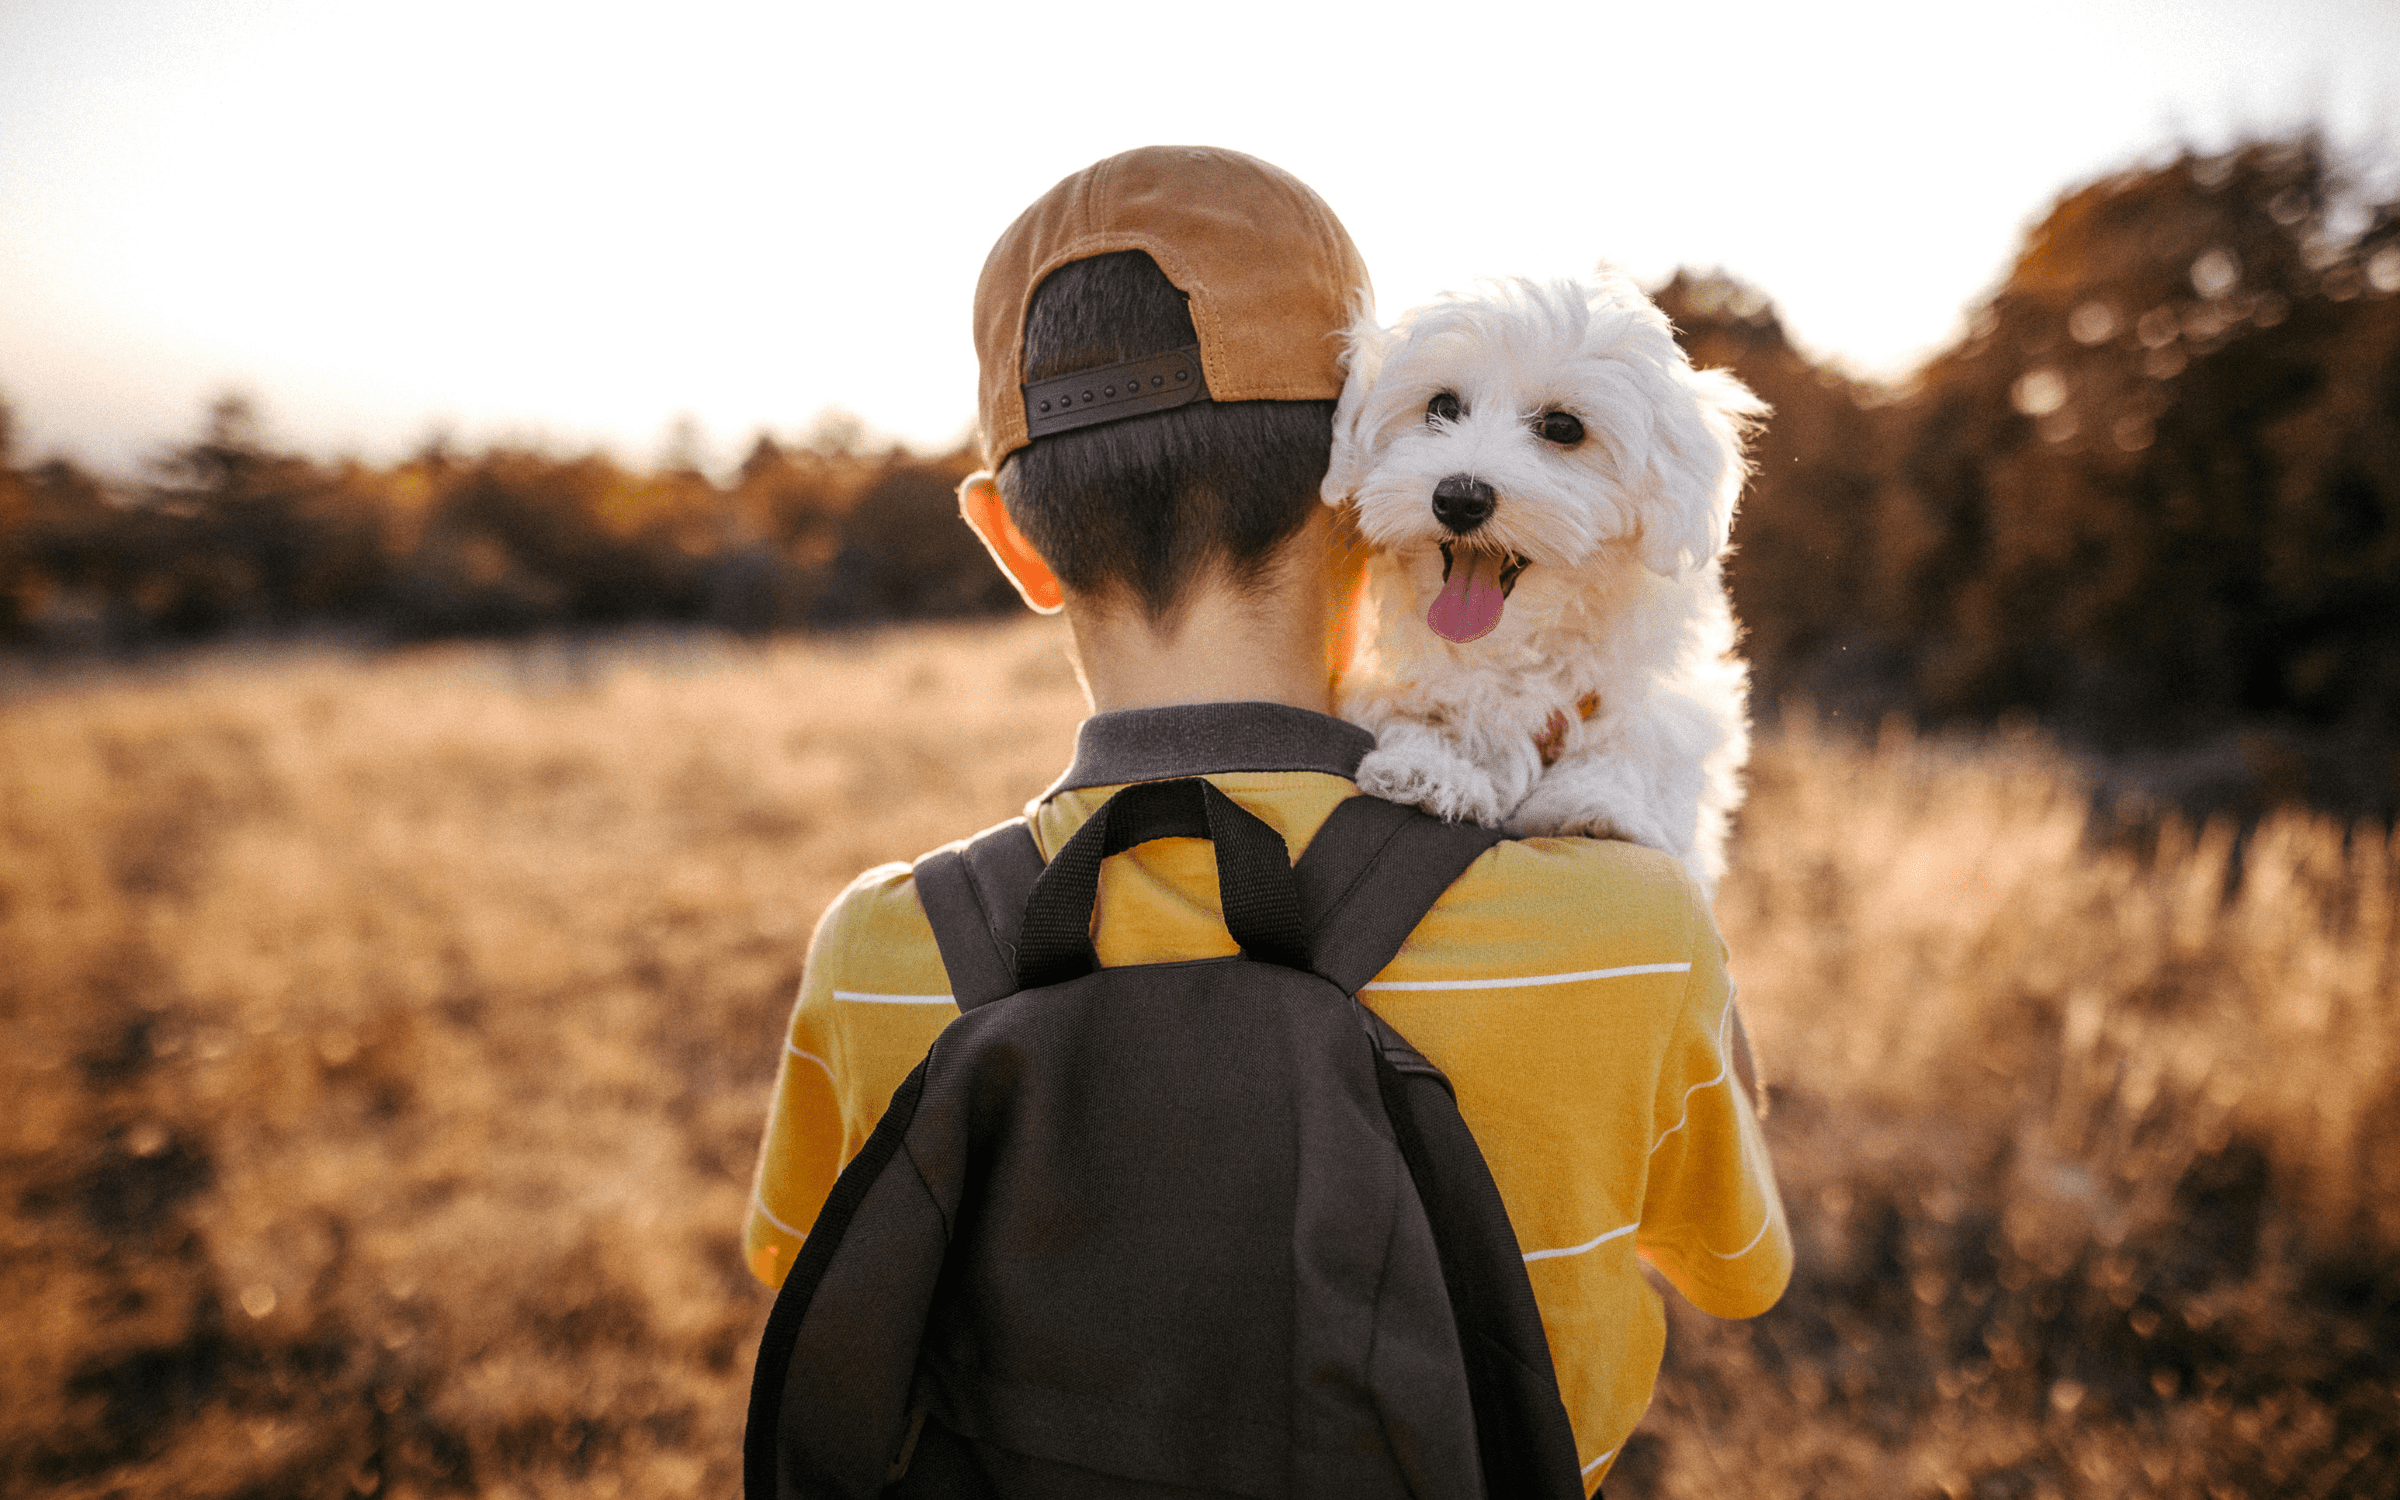 A child in a heat and a yellow shirt with a backpack, carrying a small white dog